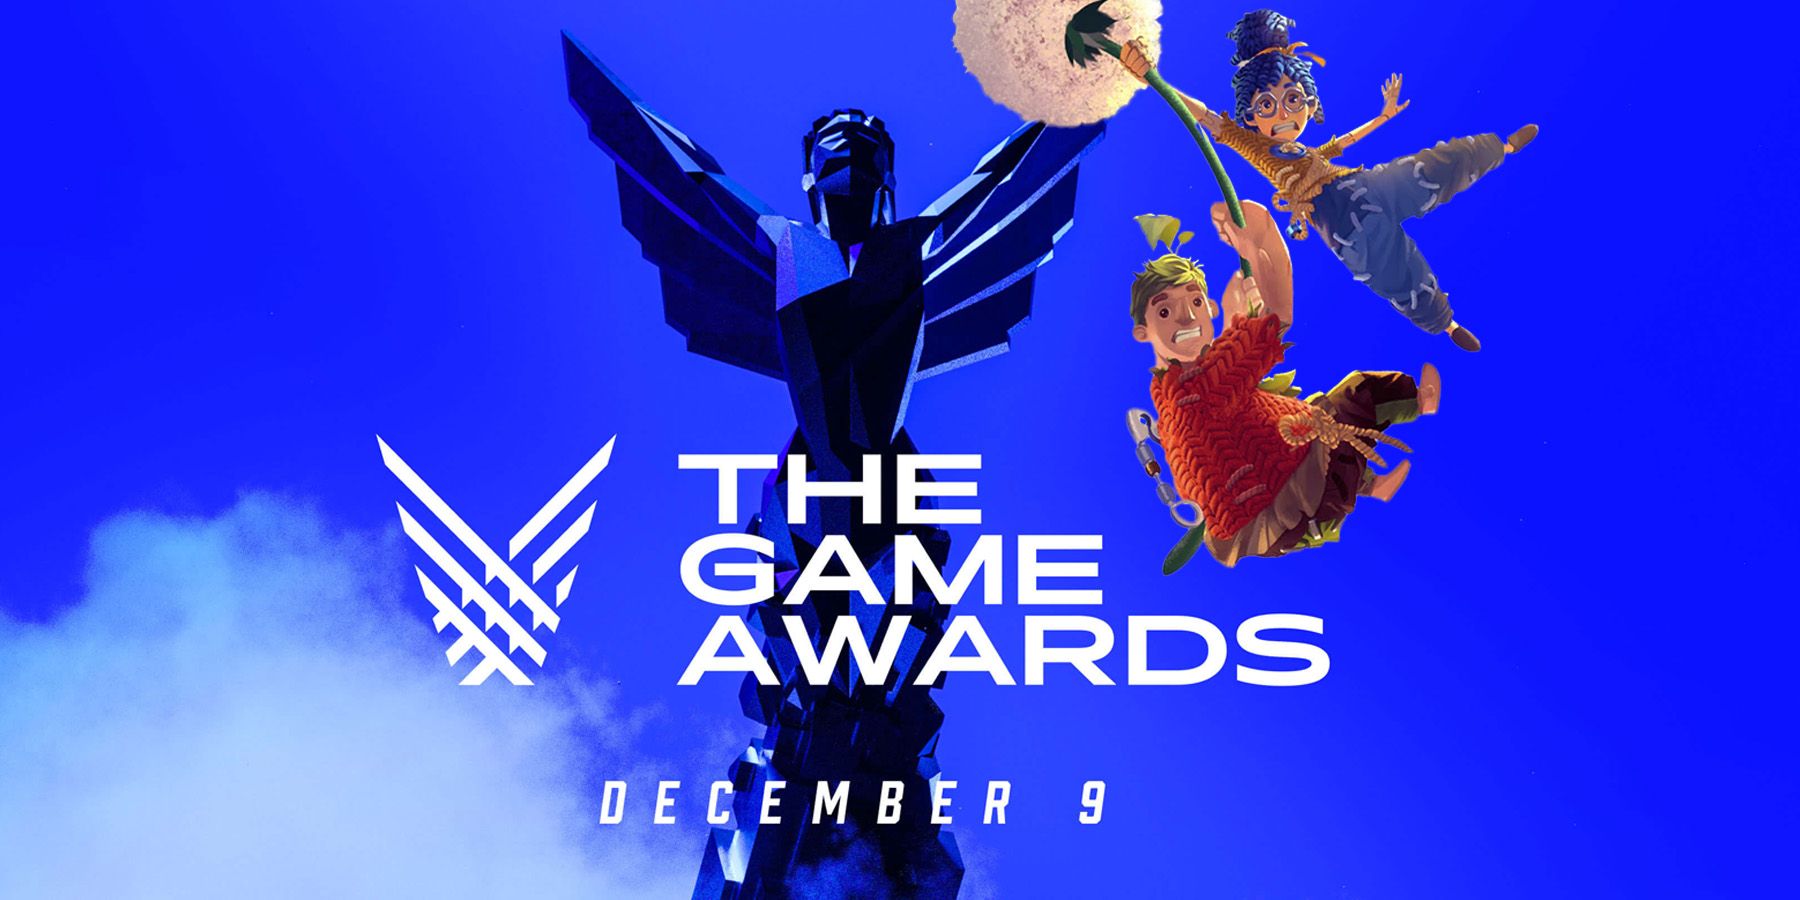 It Takes Two wins GOTY at the game awards 2021